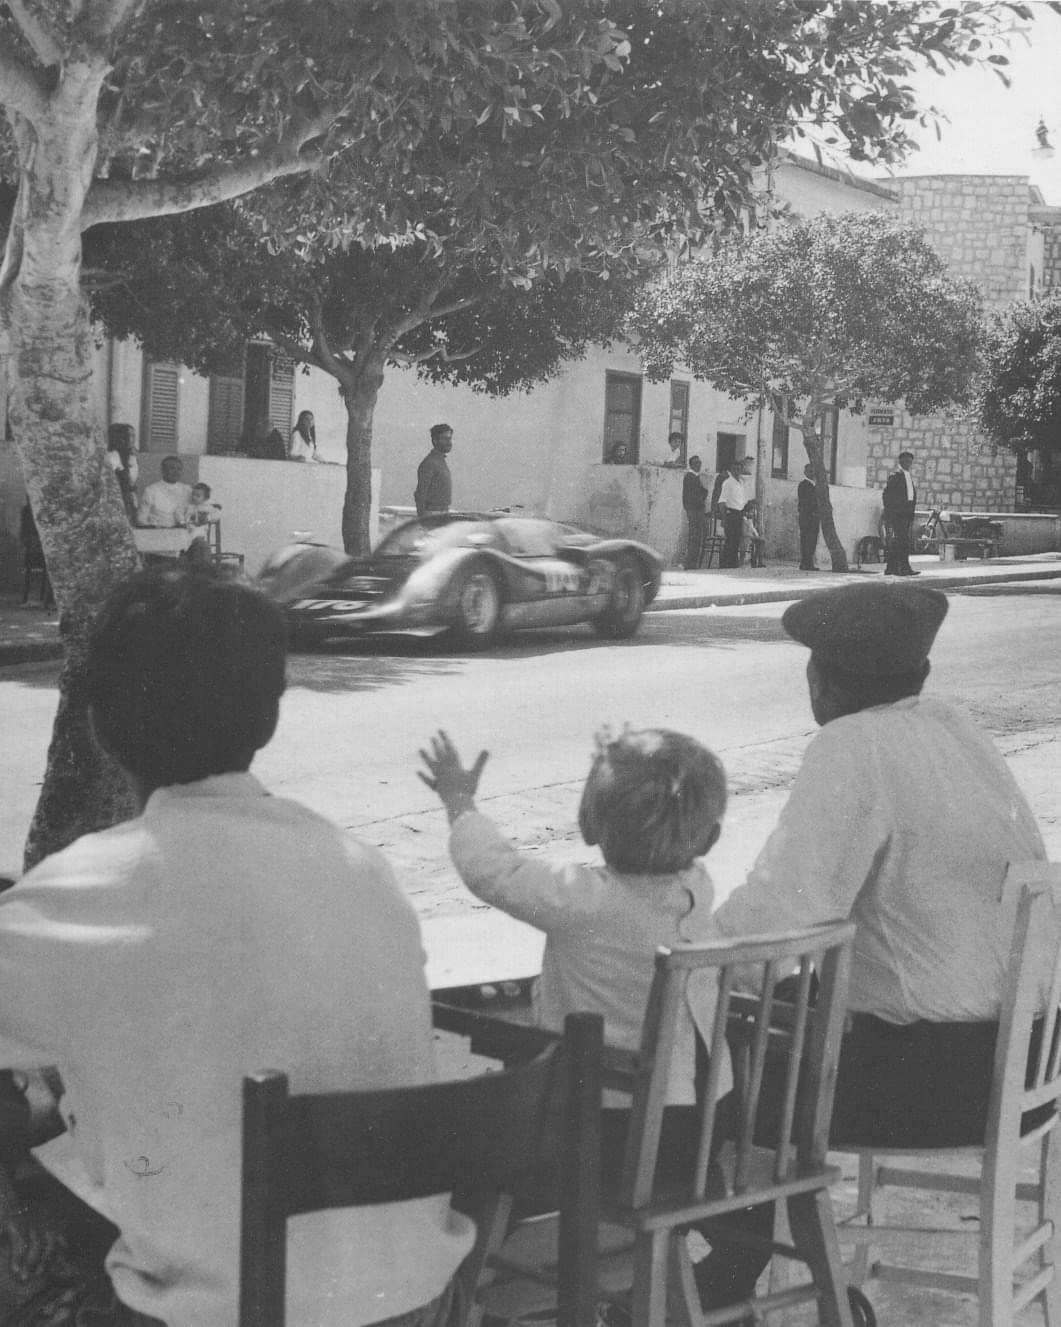 The Porsche 906 Carrera 6 of Taormina/Tacci during the 1969 Targa Florio.
The Targa Florio was an open road endurance automobile race held in the mountains of Sicily near the island’s capital of Palermo. Founded in 1906, it was the oldest sports car...